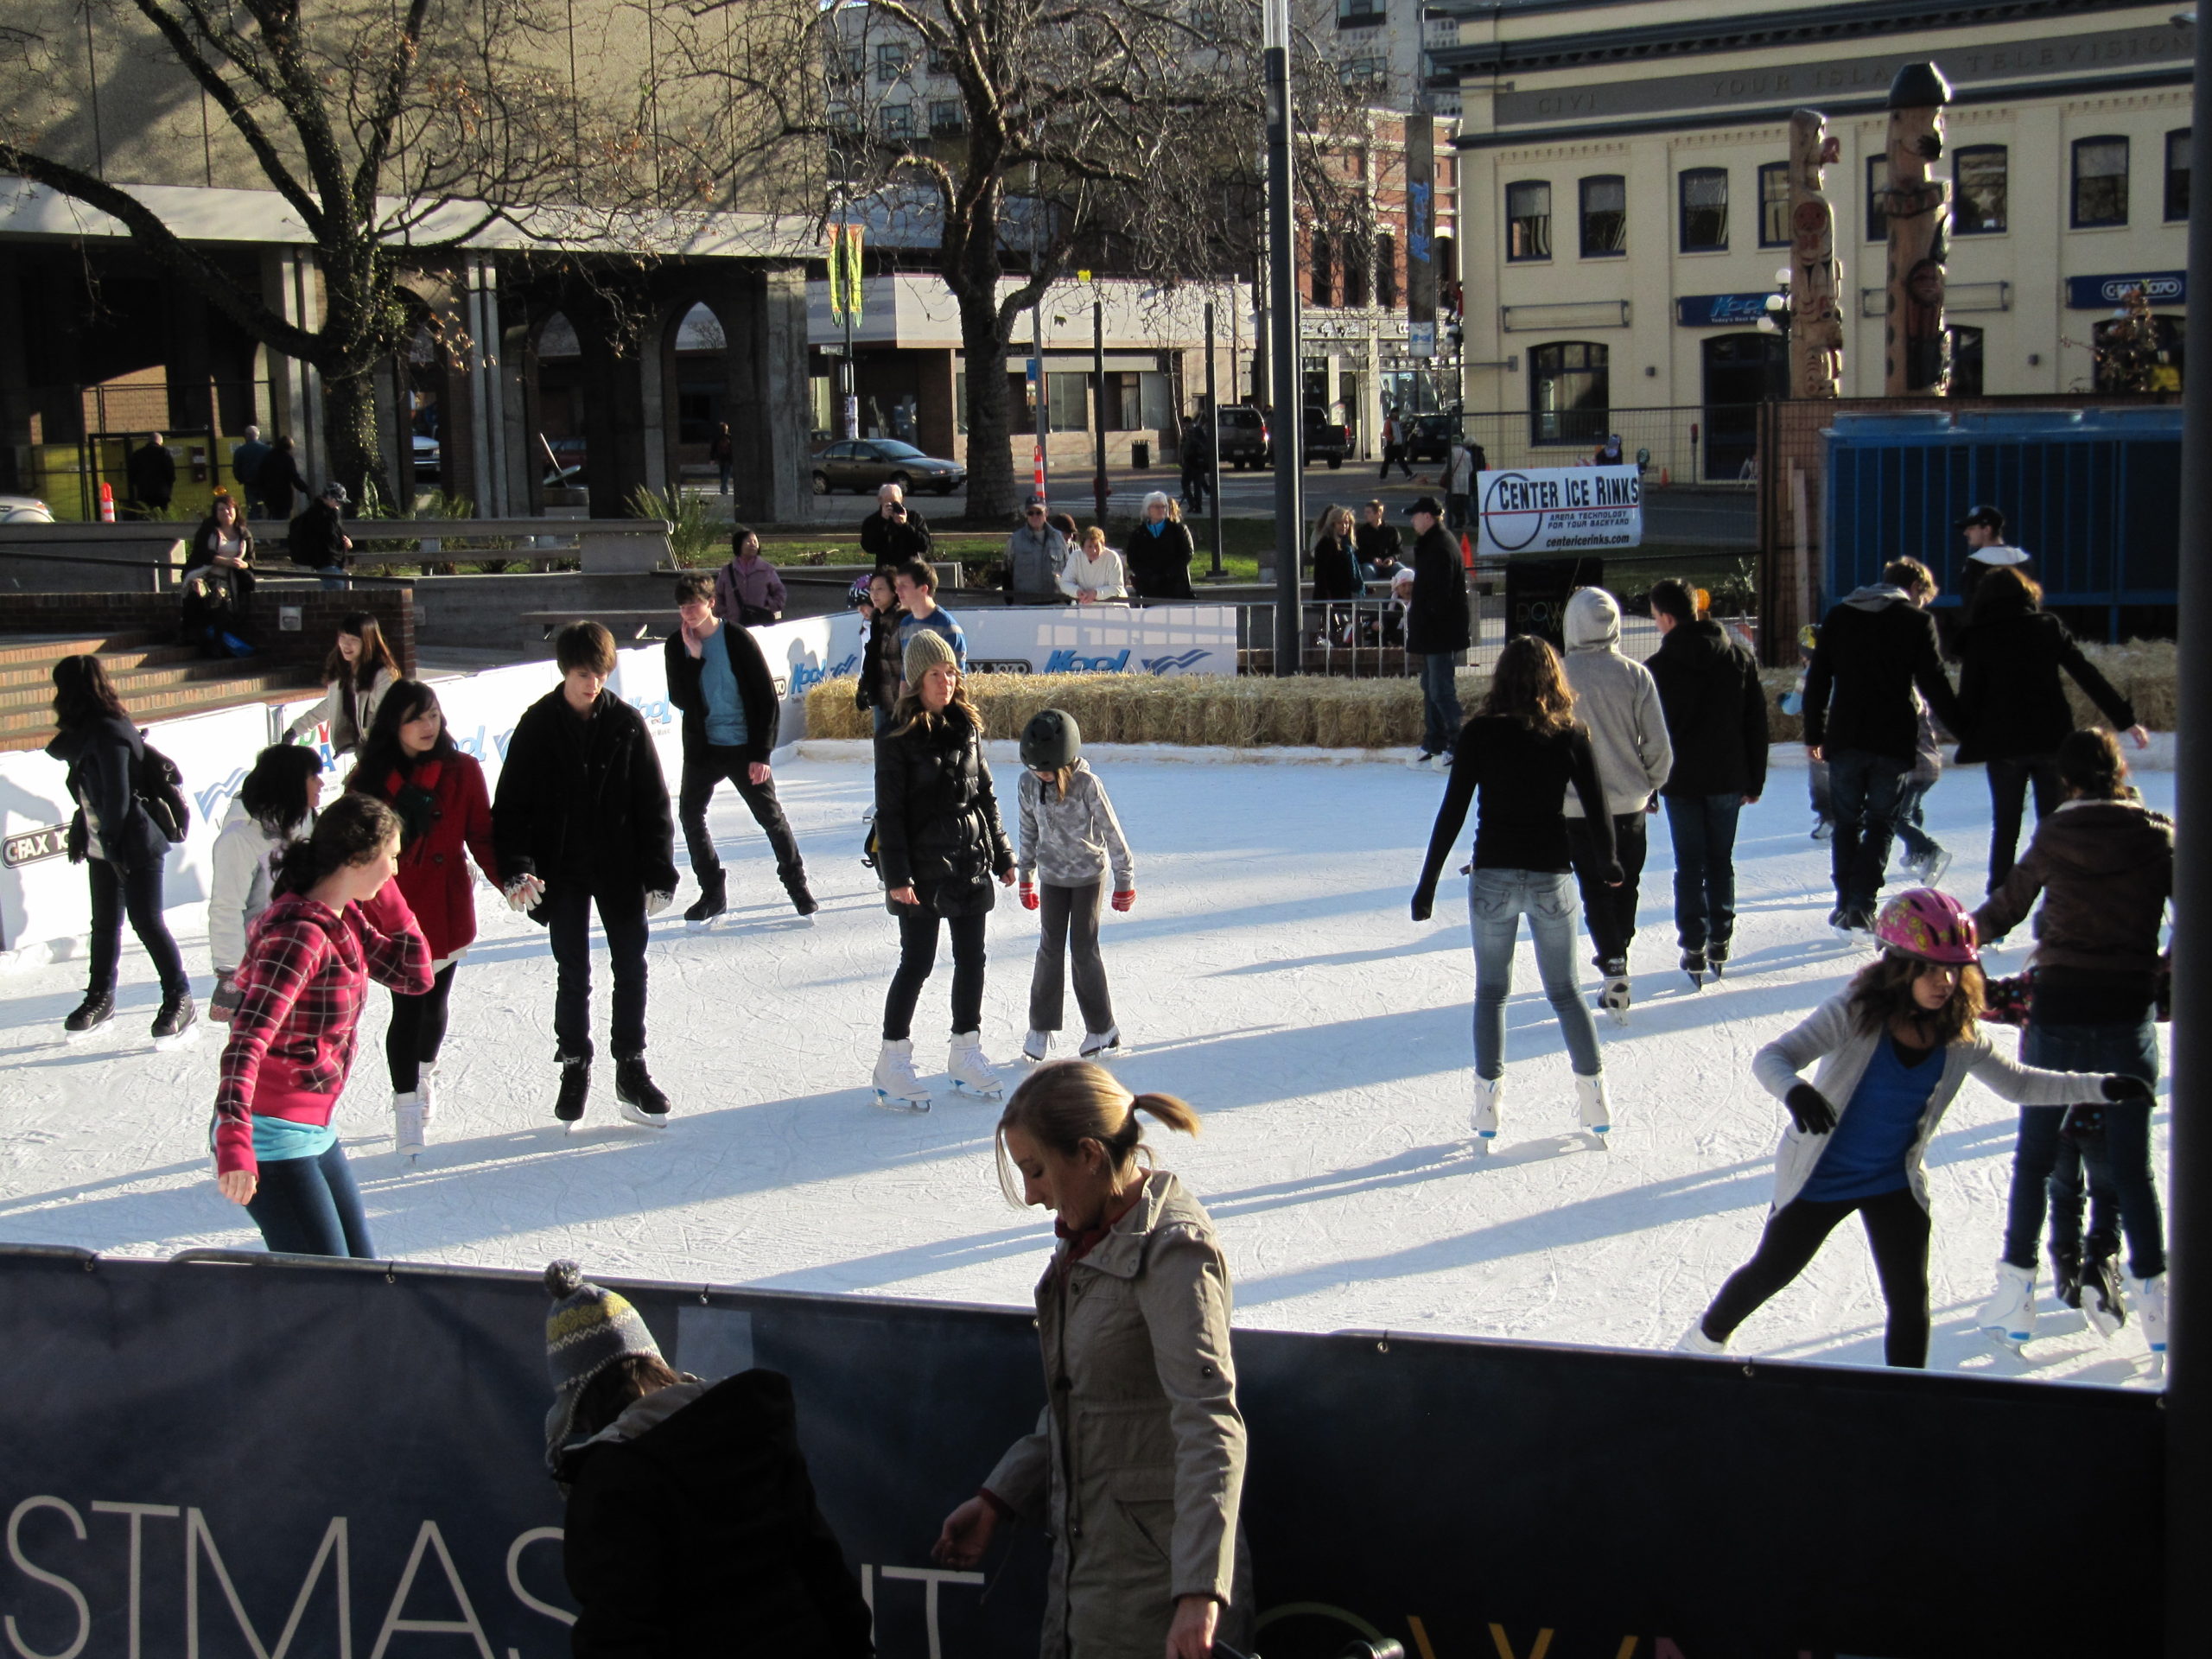 Centennial Square, Victoria BC outdoor refrigerated ice rink